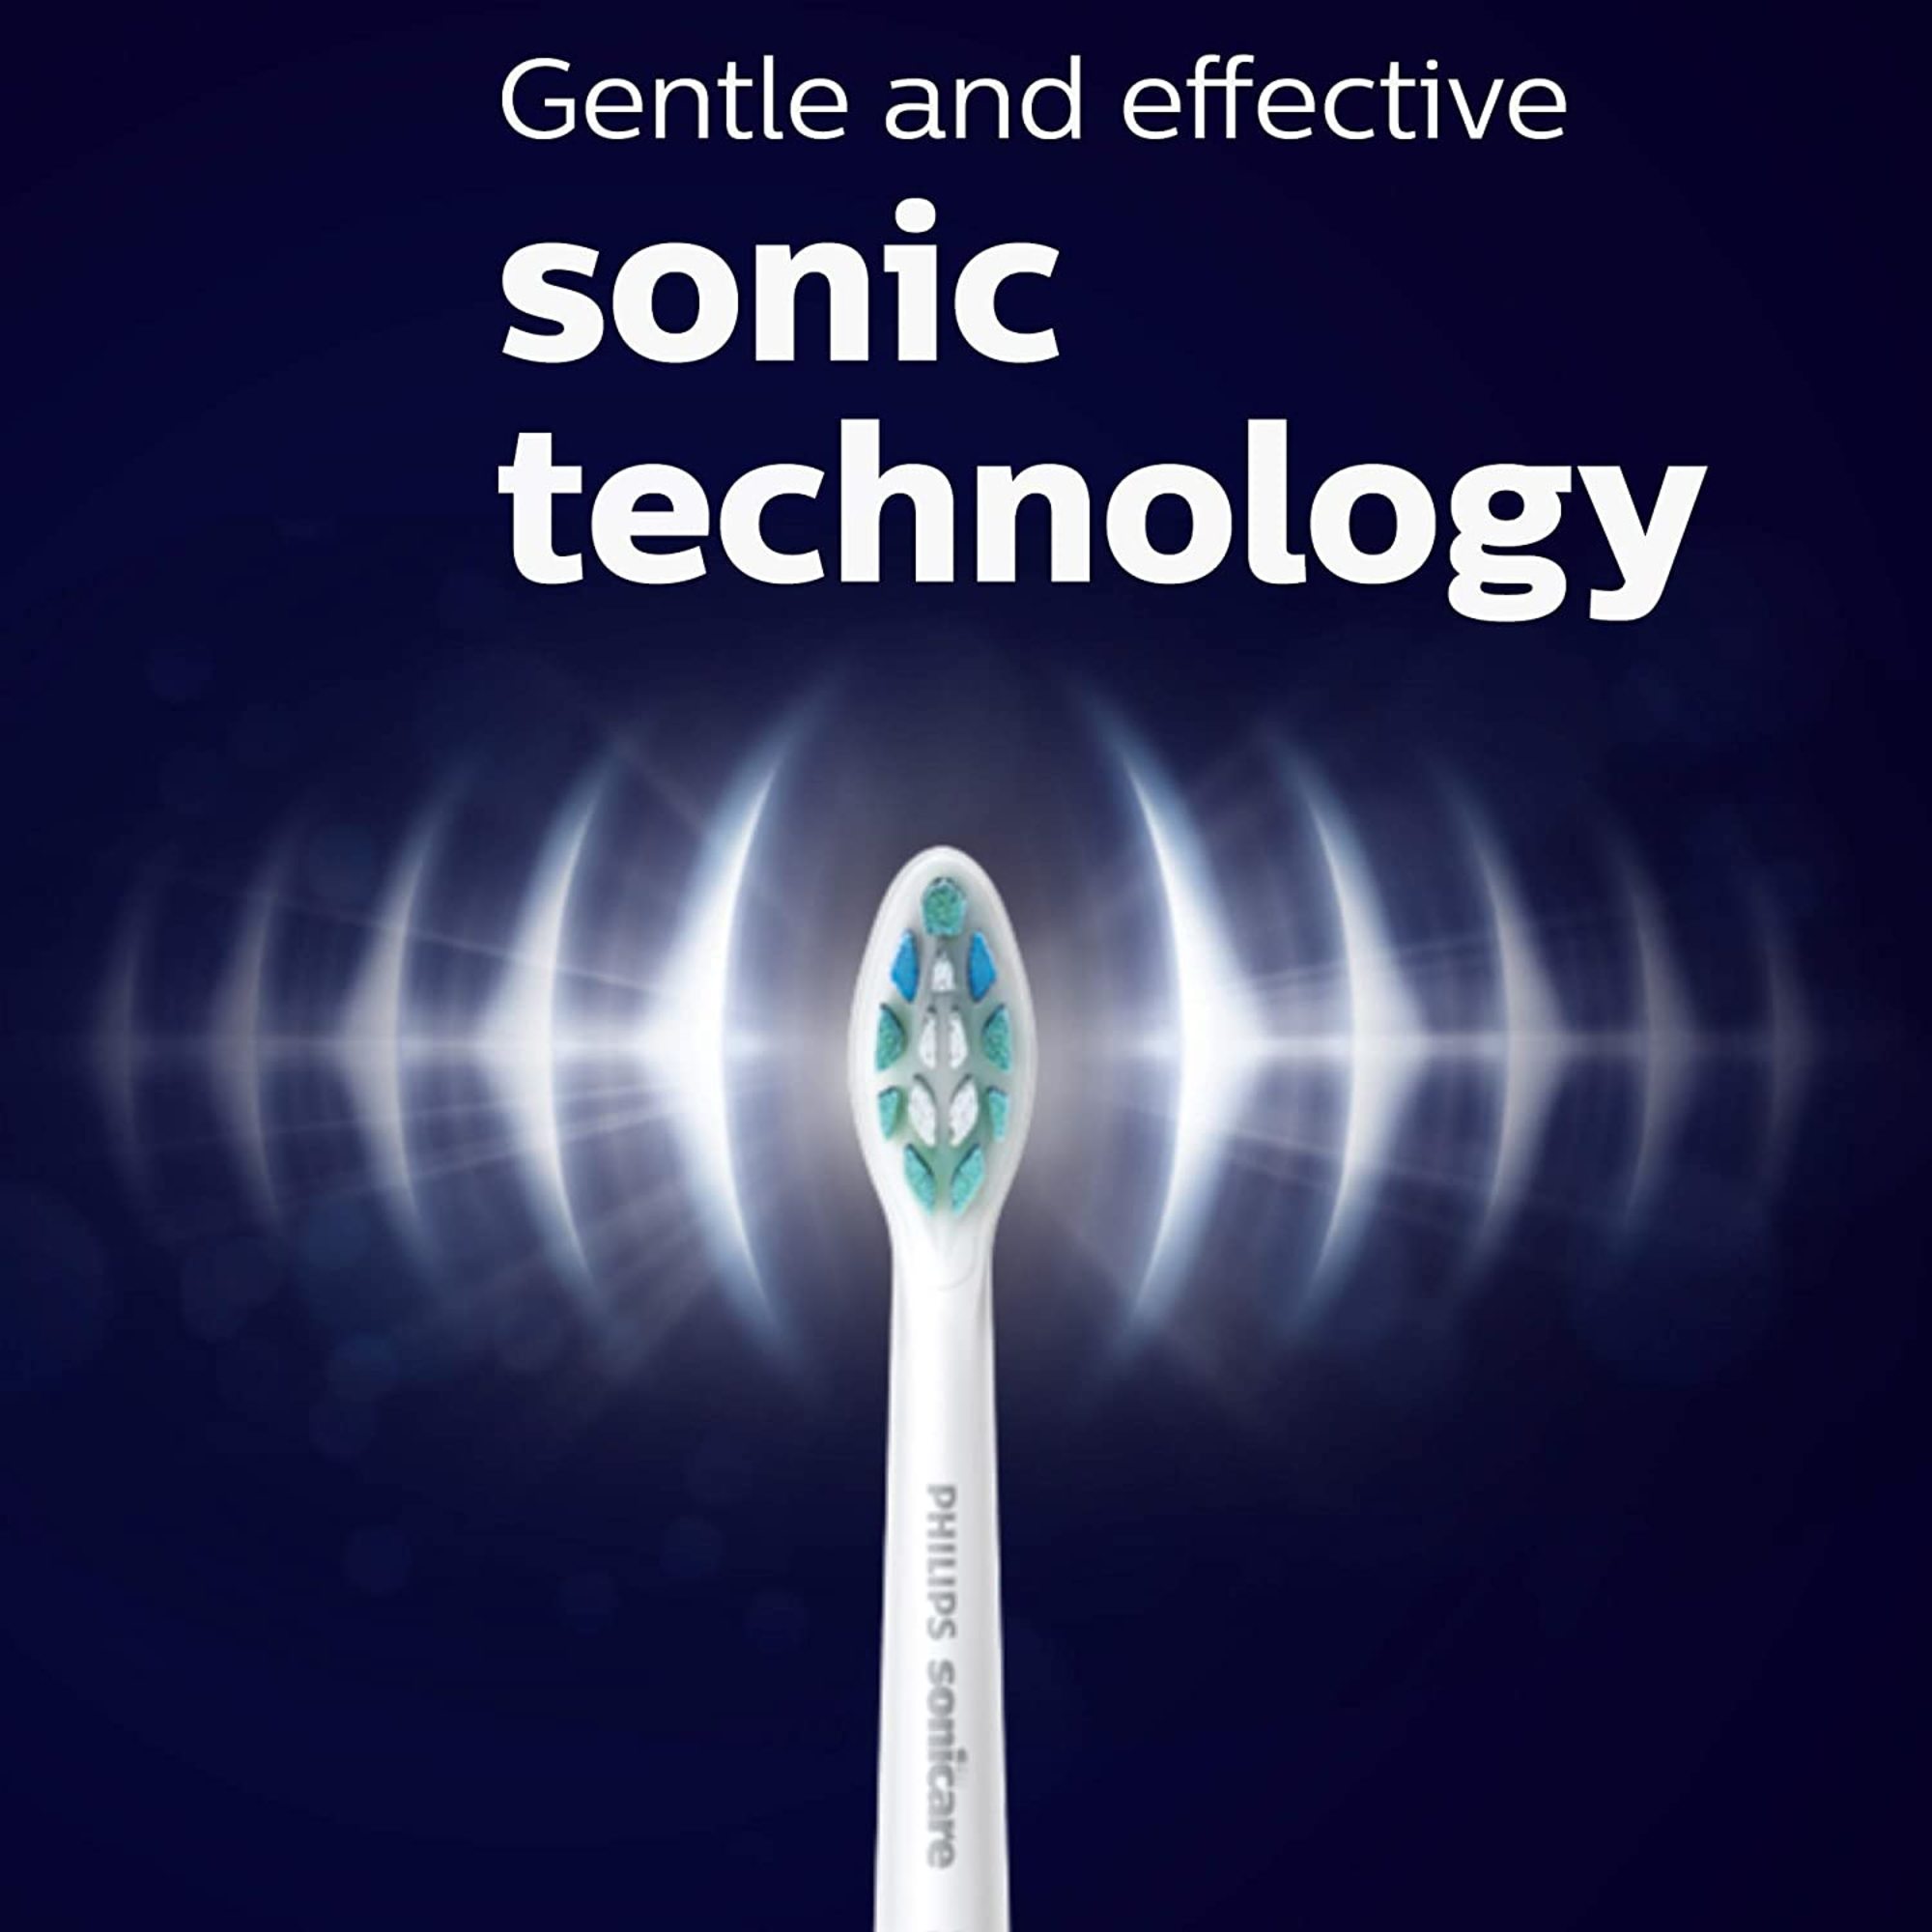 Philips Sonicare ProtectiveClean 4100 Plaque Control, Rechargeable Electric Toothbrush with Pressure Sensor, White Mint HX6817/01 - image 3 of 14